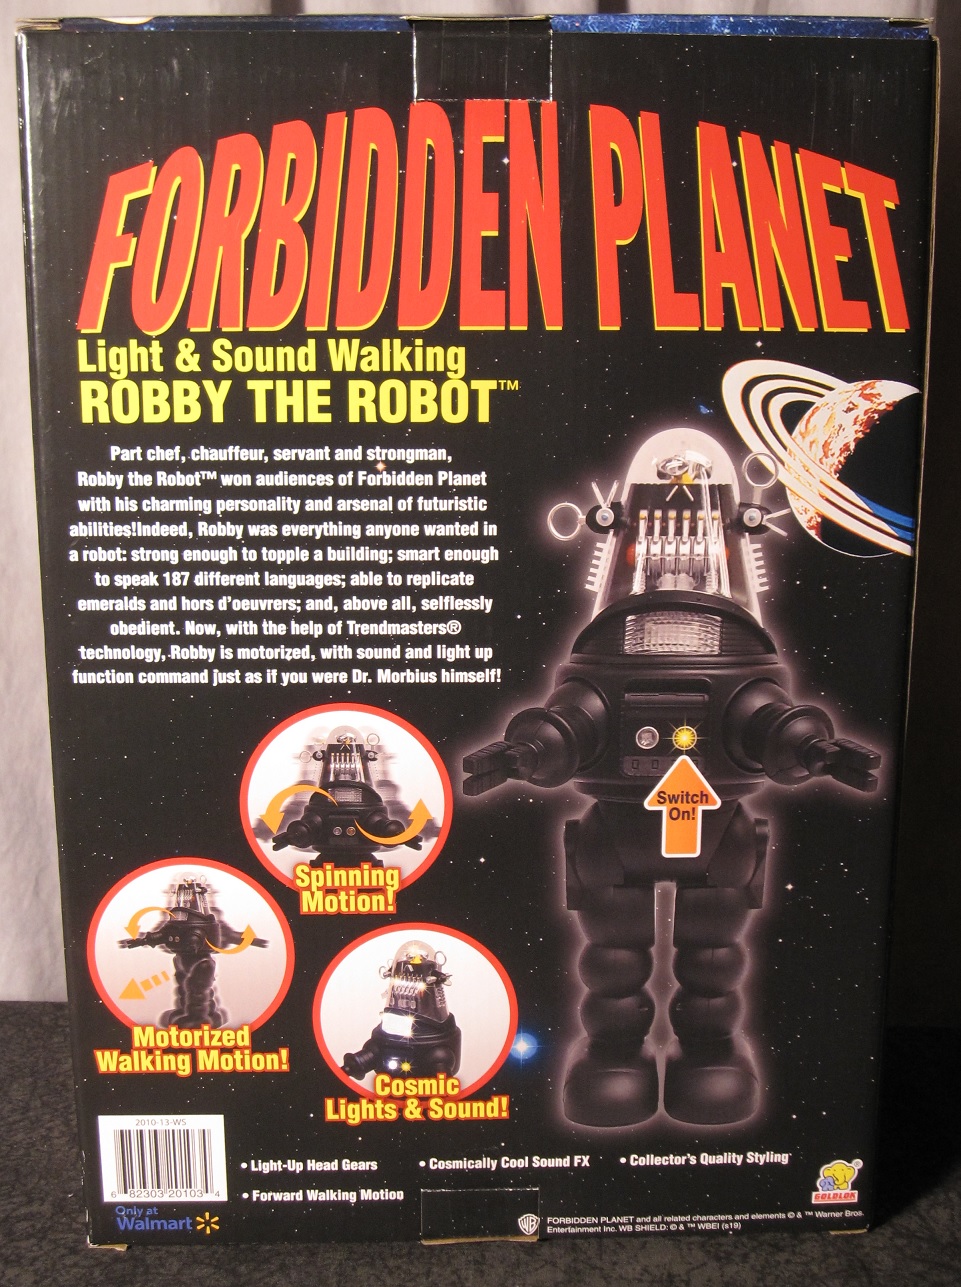 Light & Sound Walking Toy Action Figure Details about   Forbidden Planet Robby The Robot 15" 